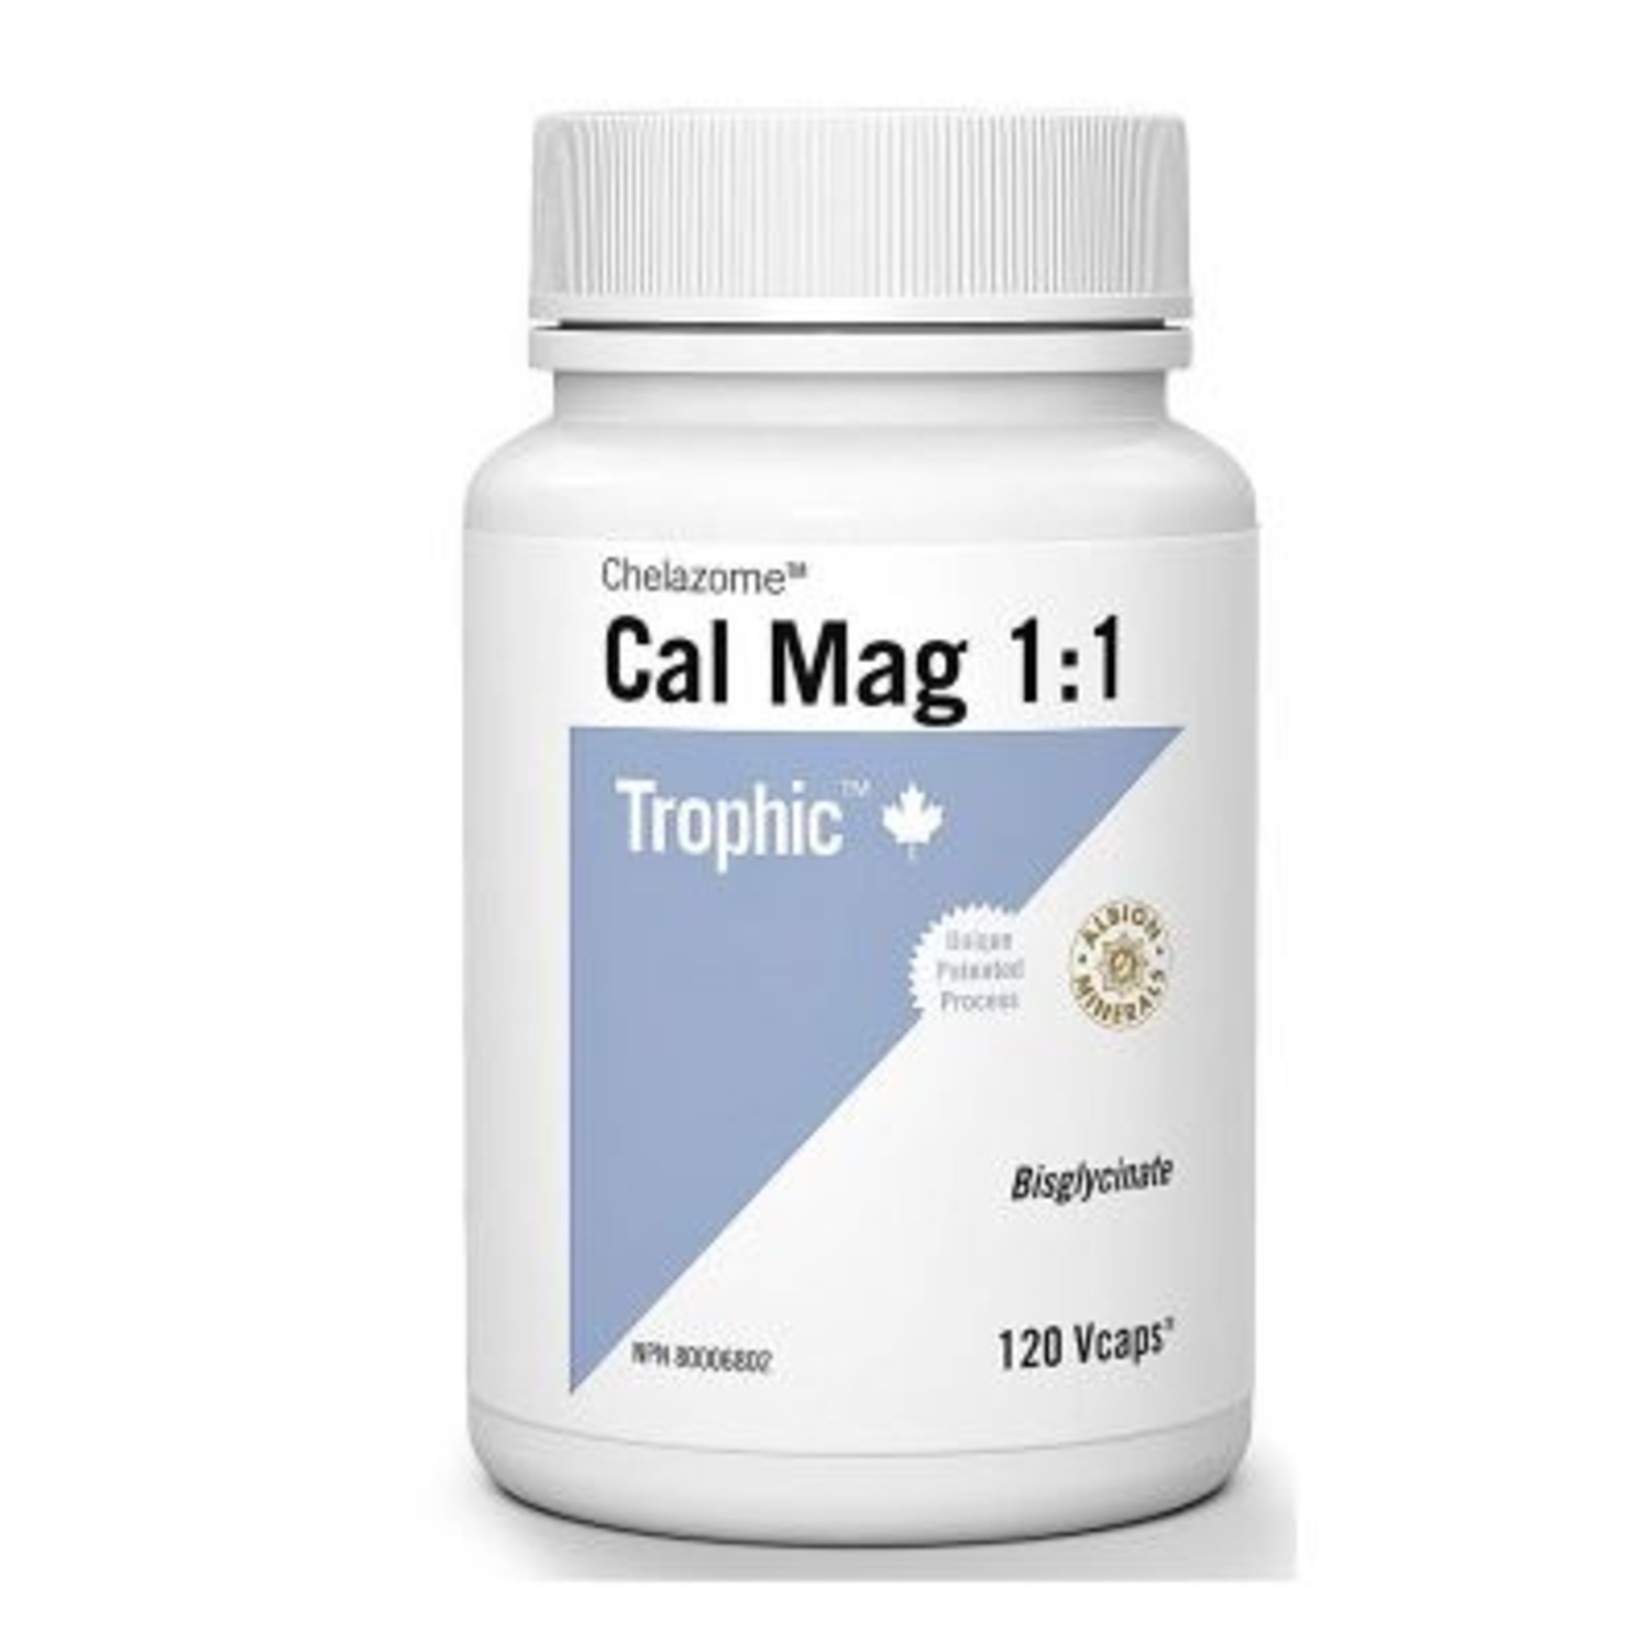 TROPHIC TROPHIC CAL MAG 1:1 CHELAZOME 120 VCAPS